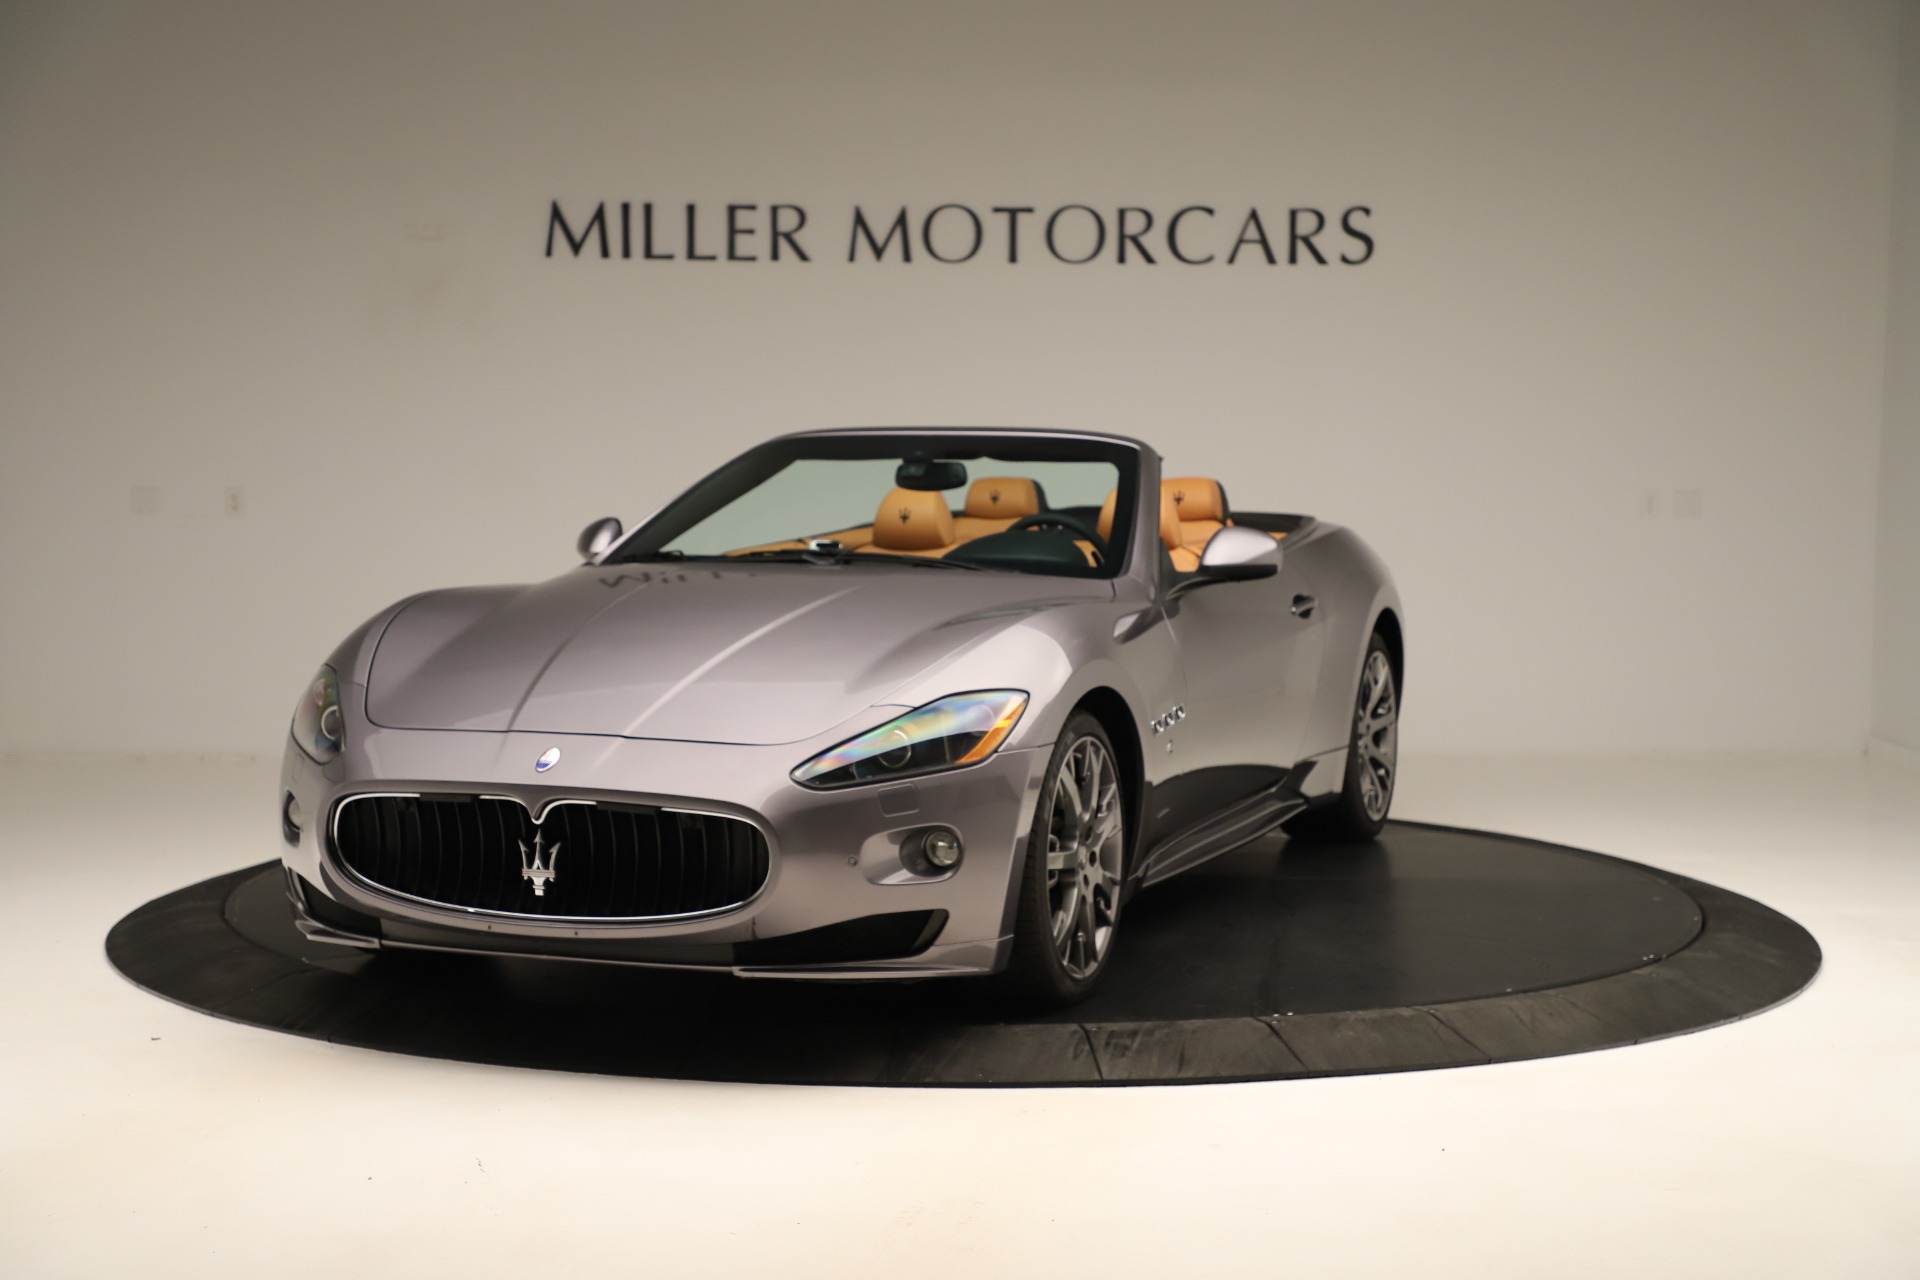 Used 2012 Maserati GranTurismo Sport for sale Sold at Bentley Greenwich in Greenwich CT 06830 1